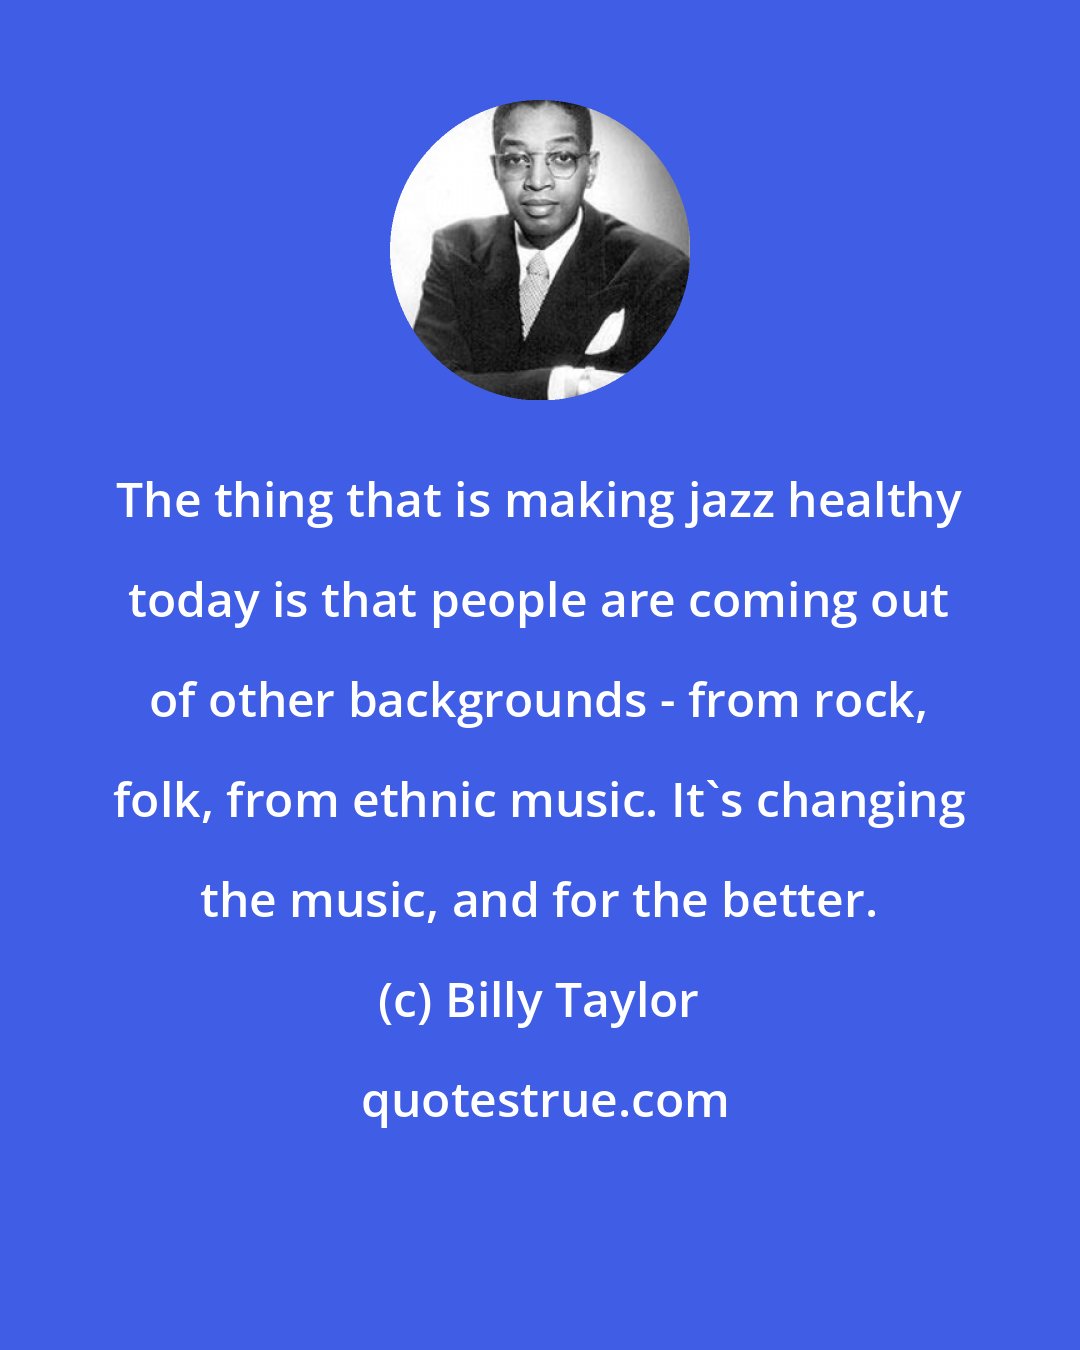 Billy Taylor: The thing that is making jazz healthy today is that people are coming out of other backgrounds - from rock, folk, from ethnic music. It's changing the music, and for the better.